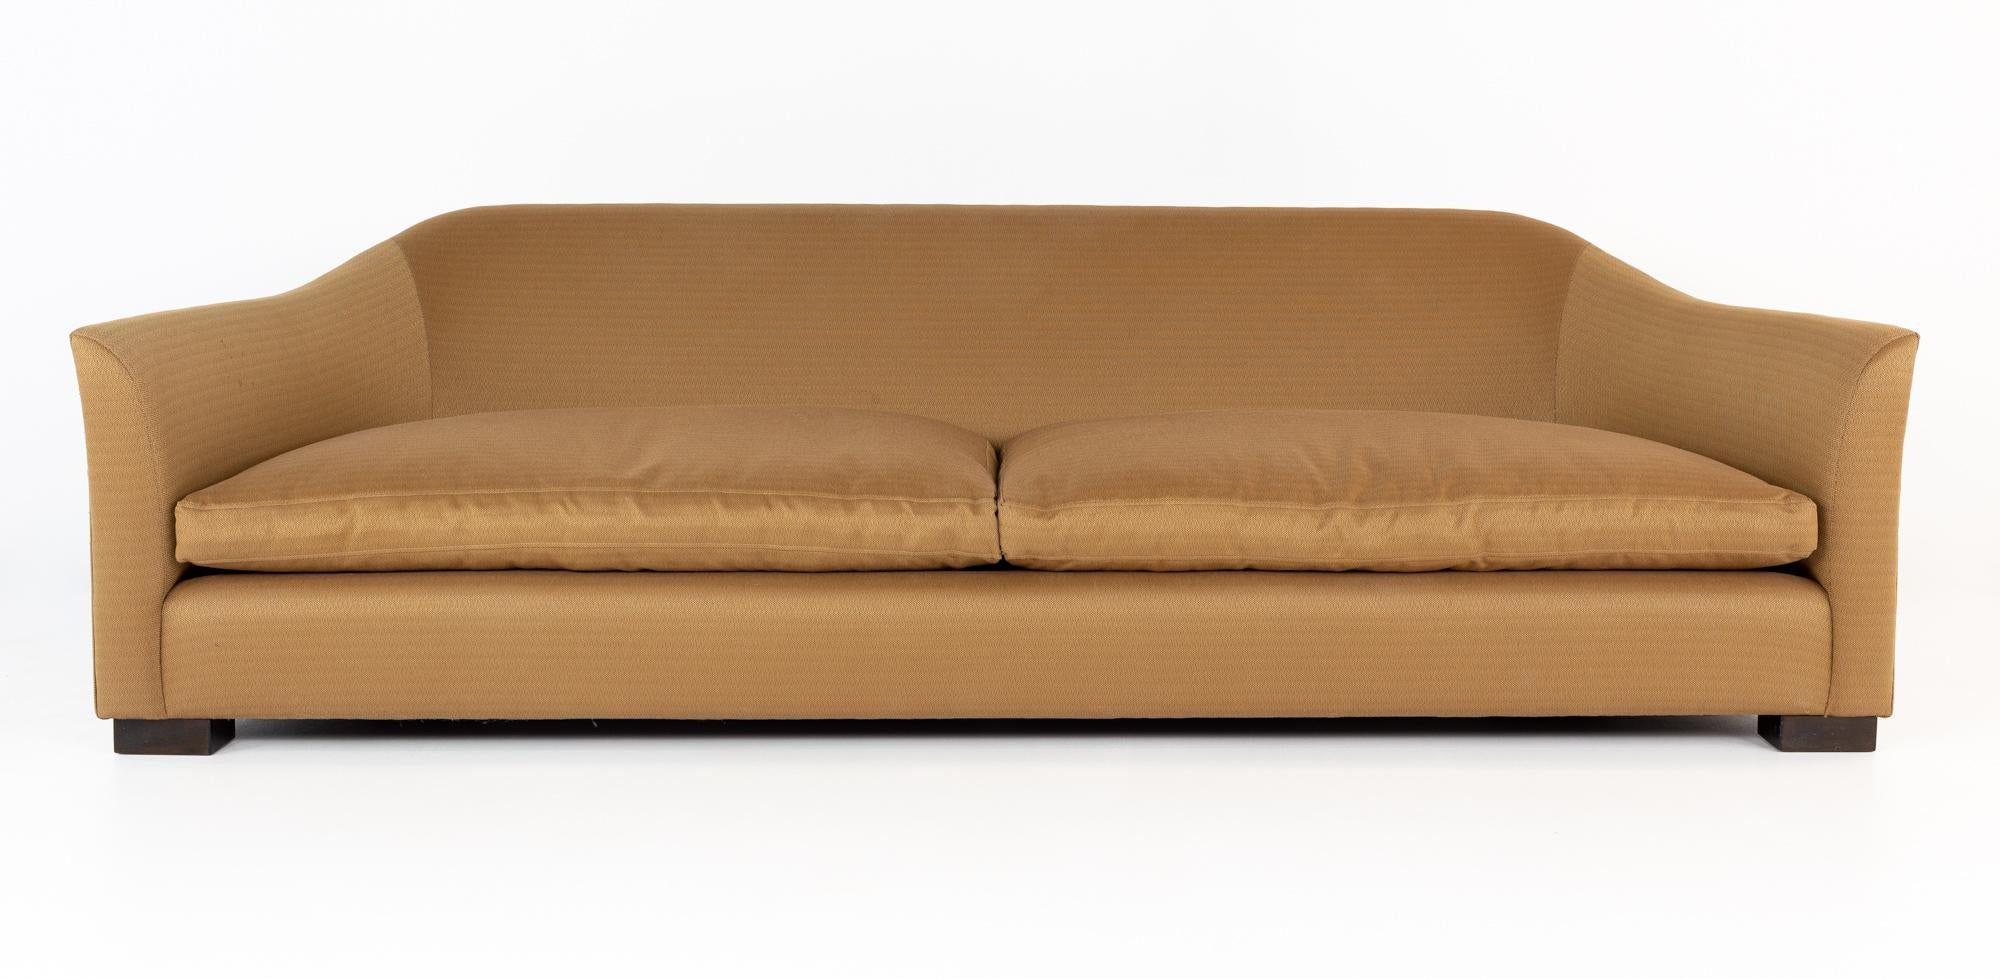 Montauk contemporary down filled sofa

This sofa measures: 102 wide x 45 deep x 30.5 inches high, with a seat height of 18 and arm height of 24.5 inches

About Photos: We take our photos in a controlled lighting studio to show as much detail as